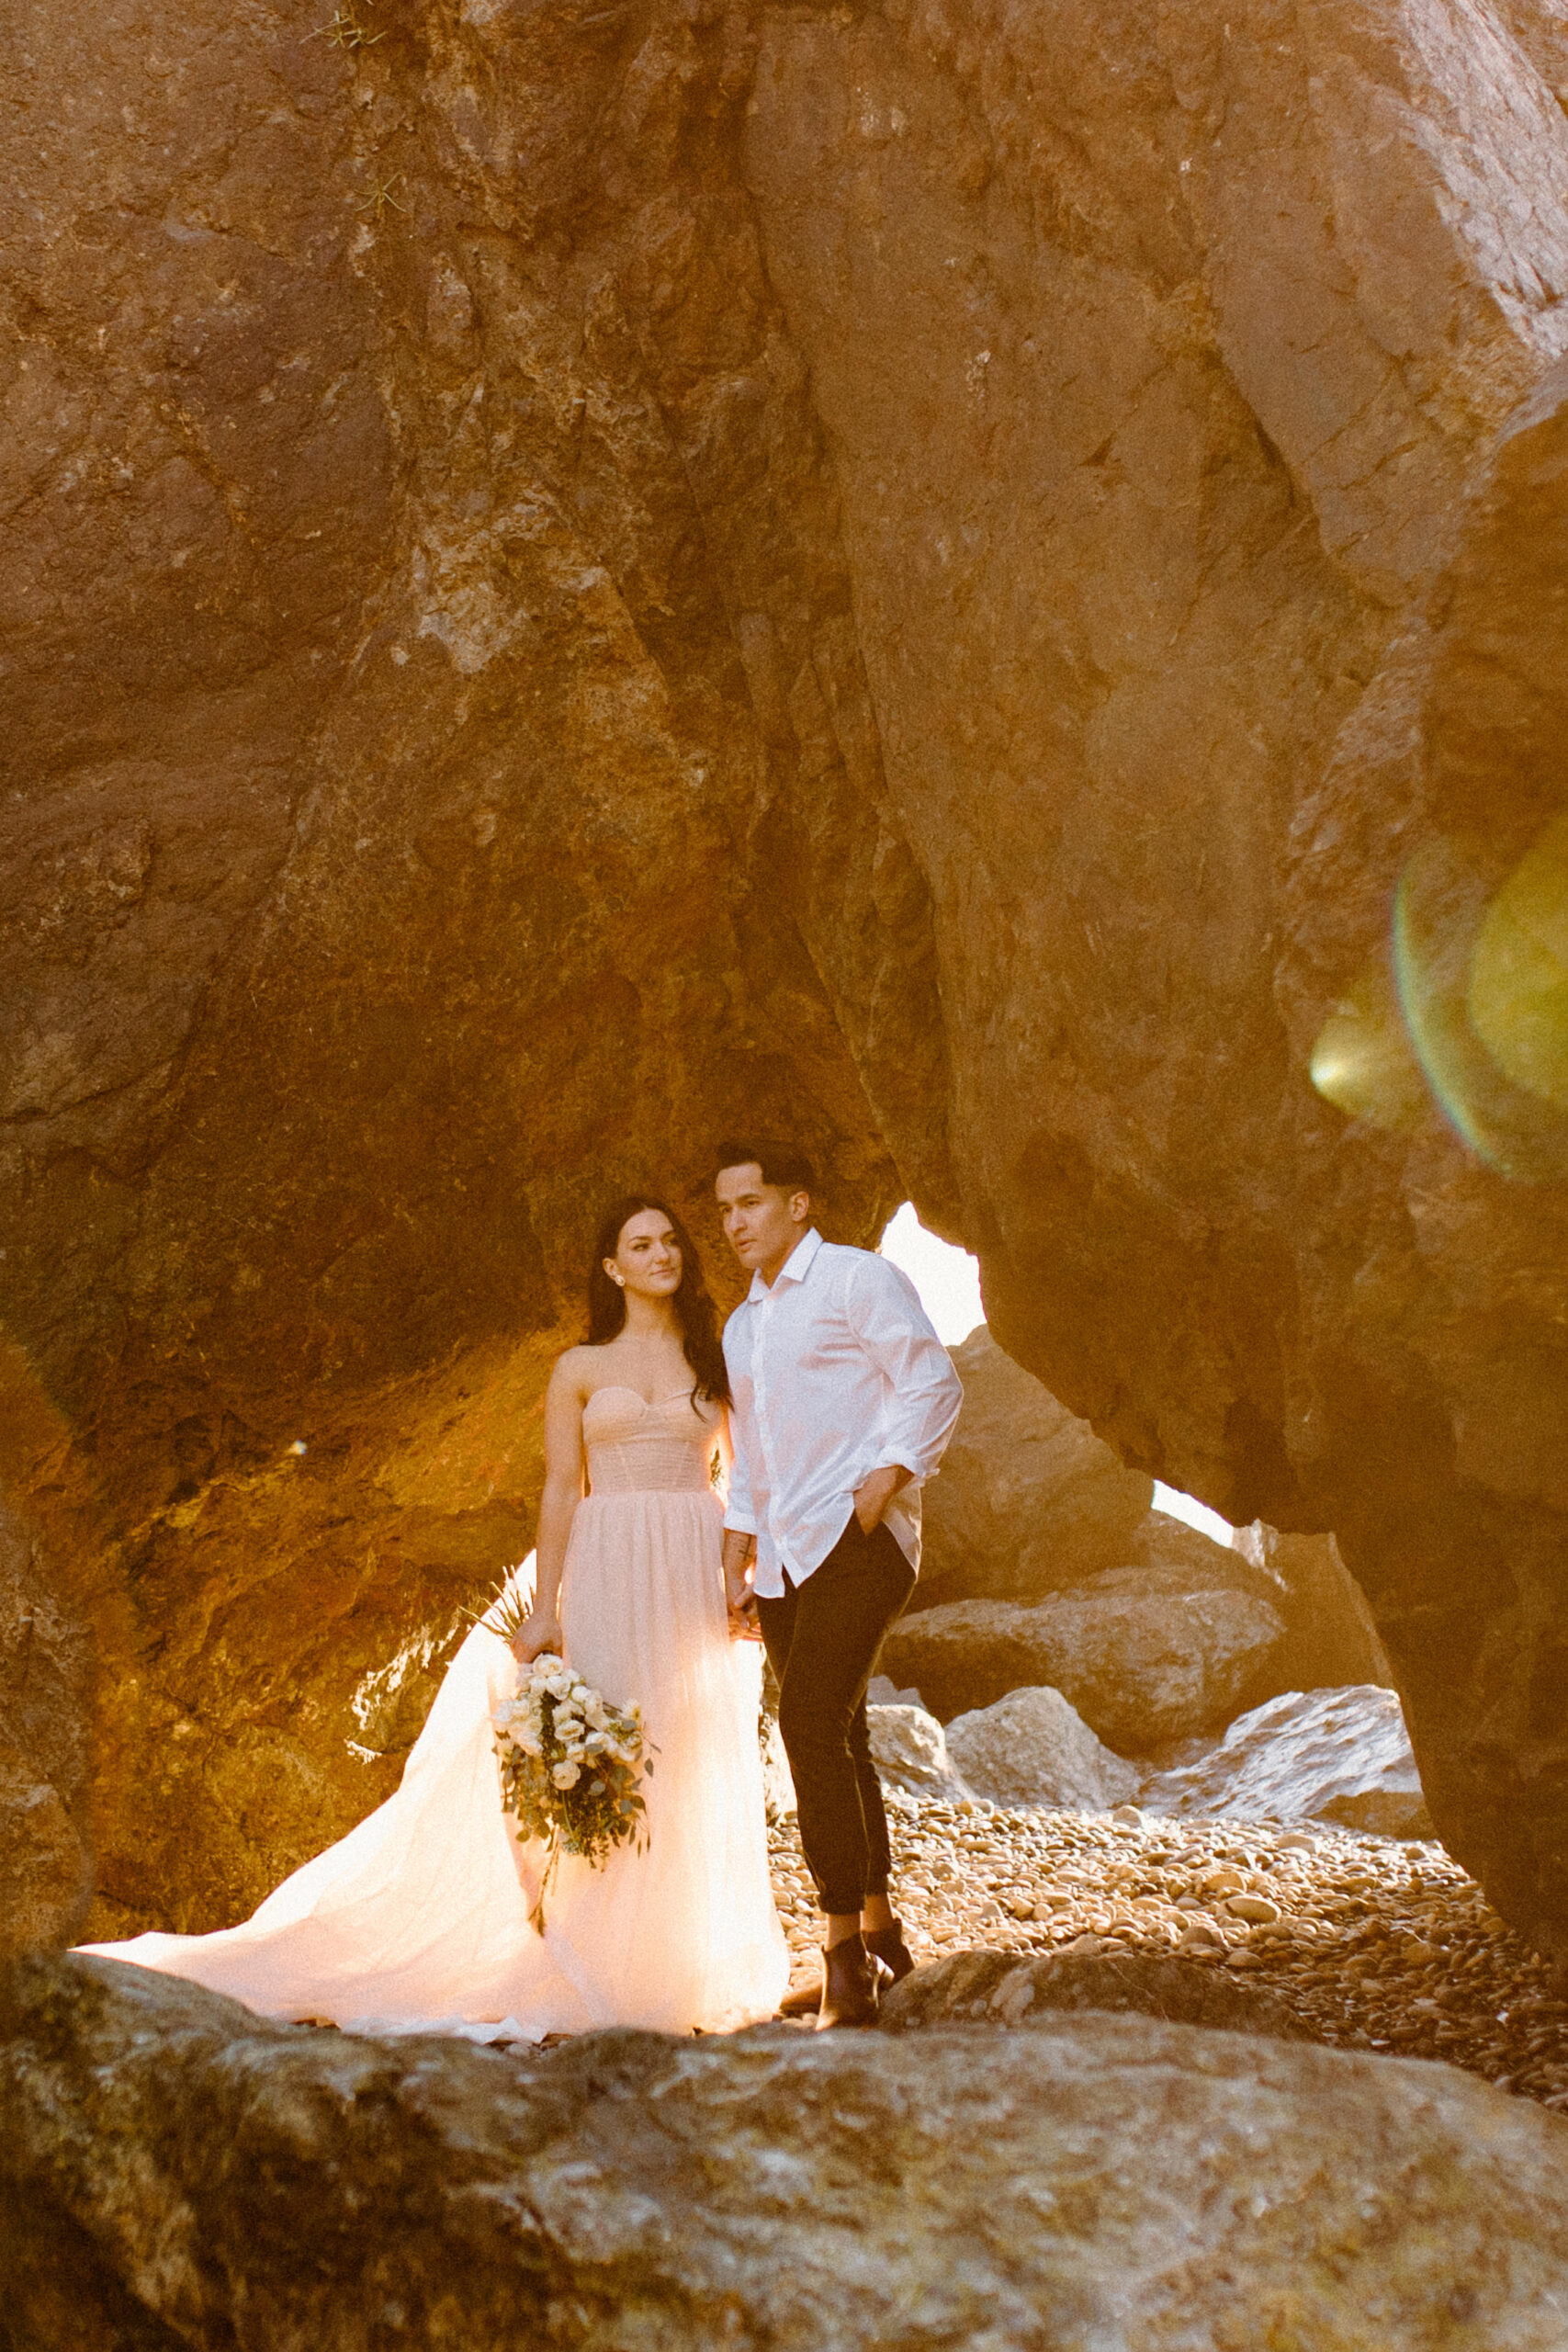 Couples Photos at their Ruby Beach Elopement